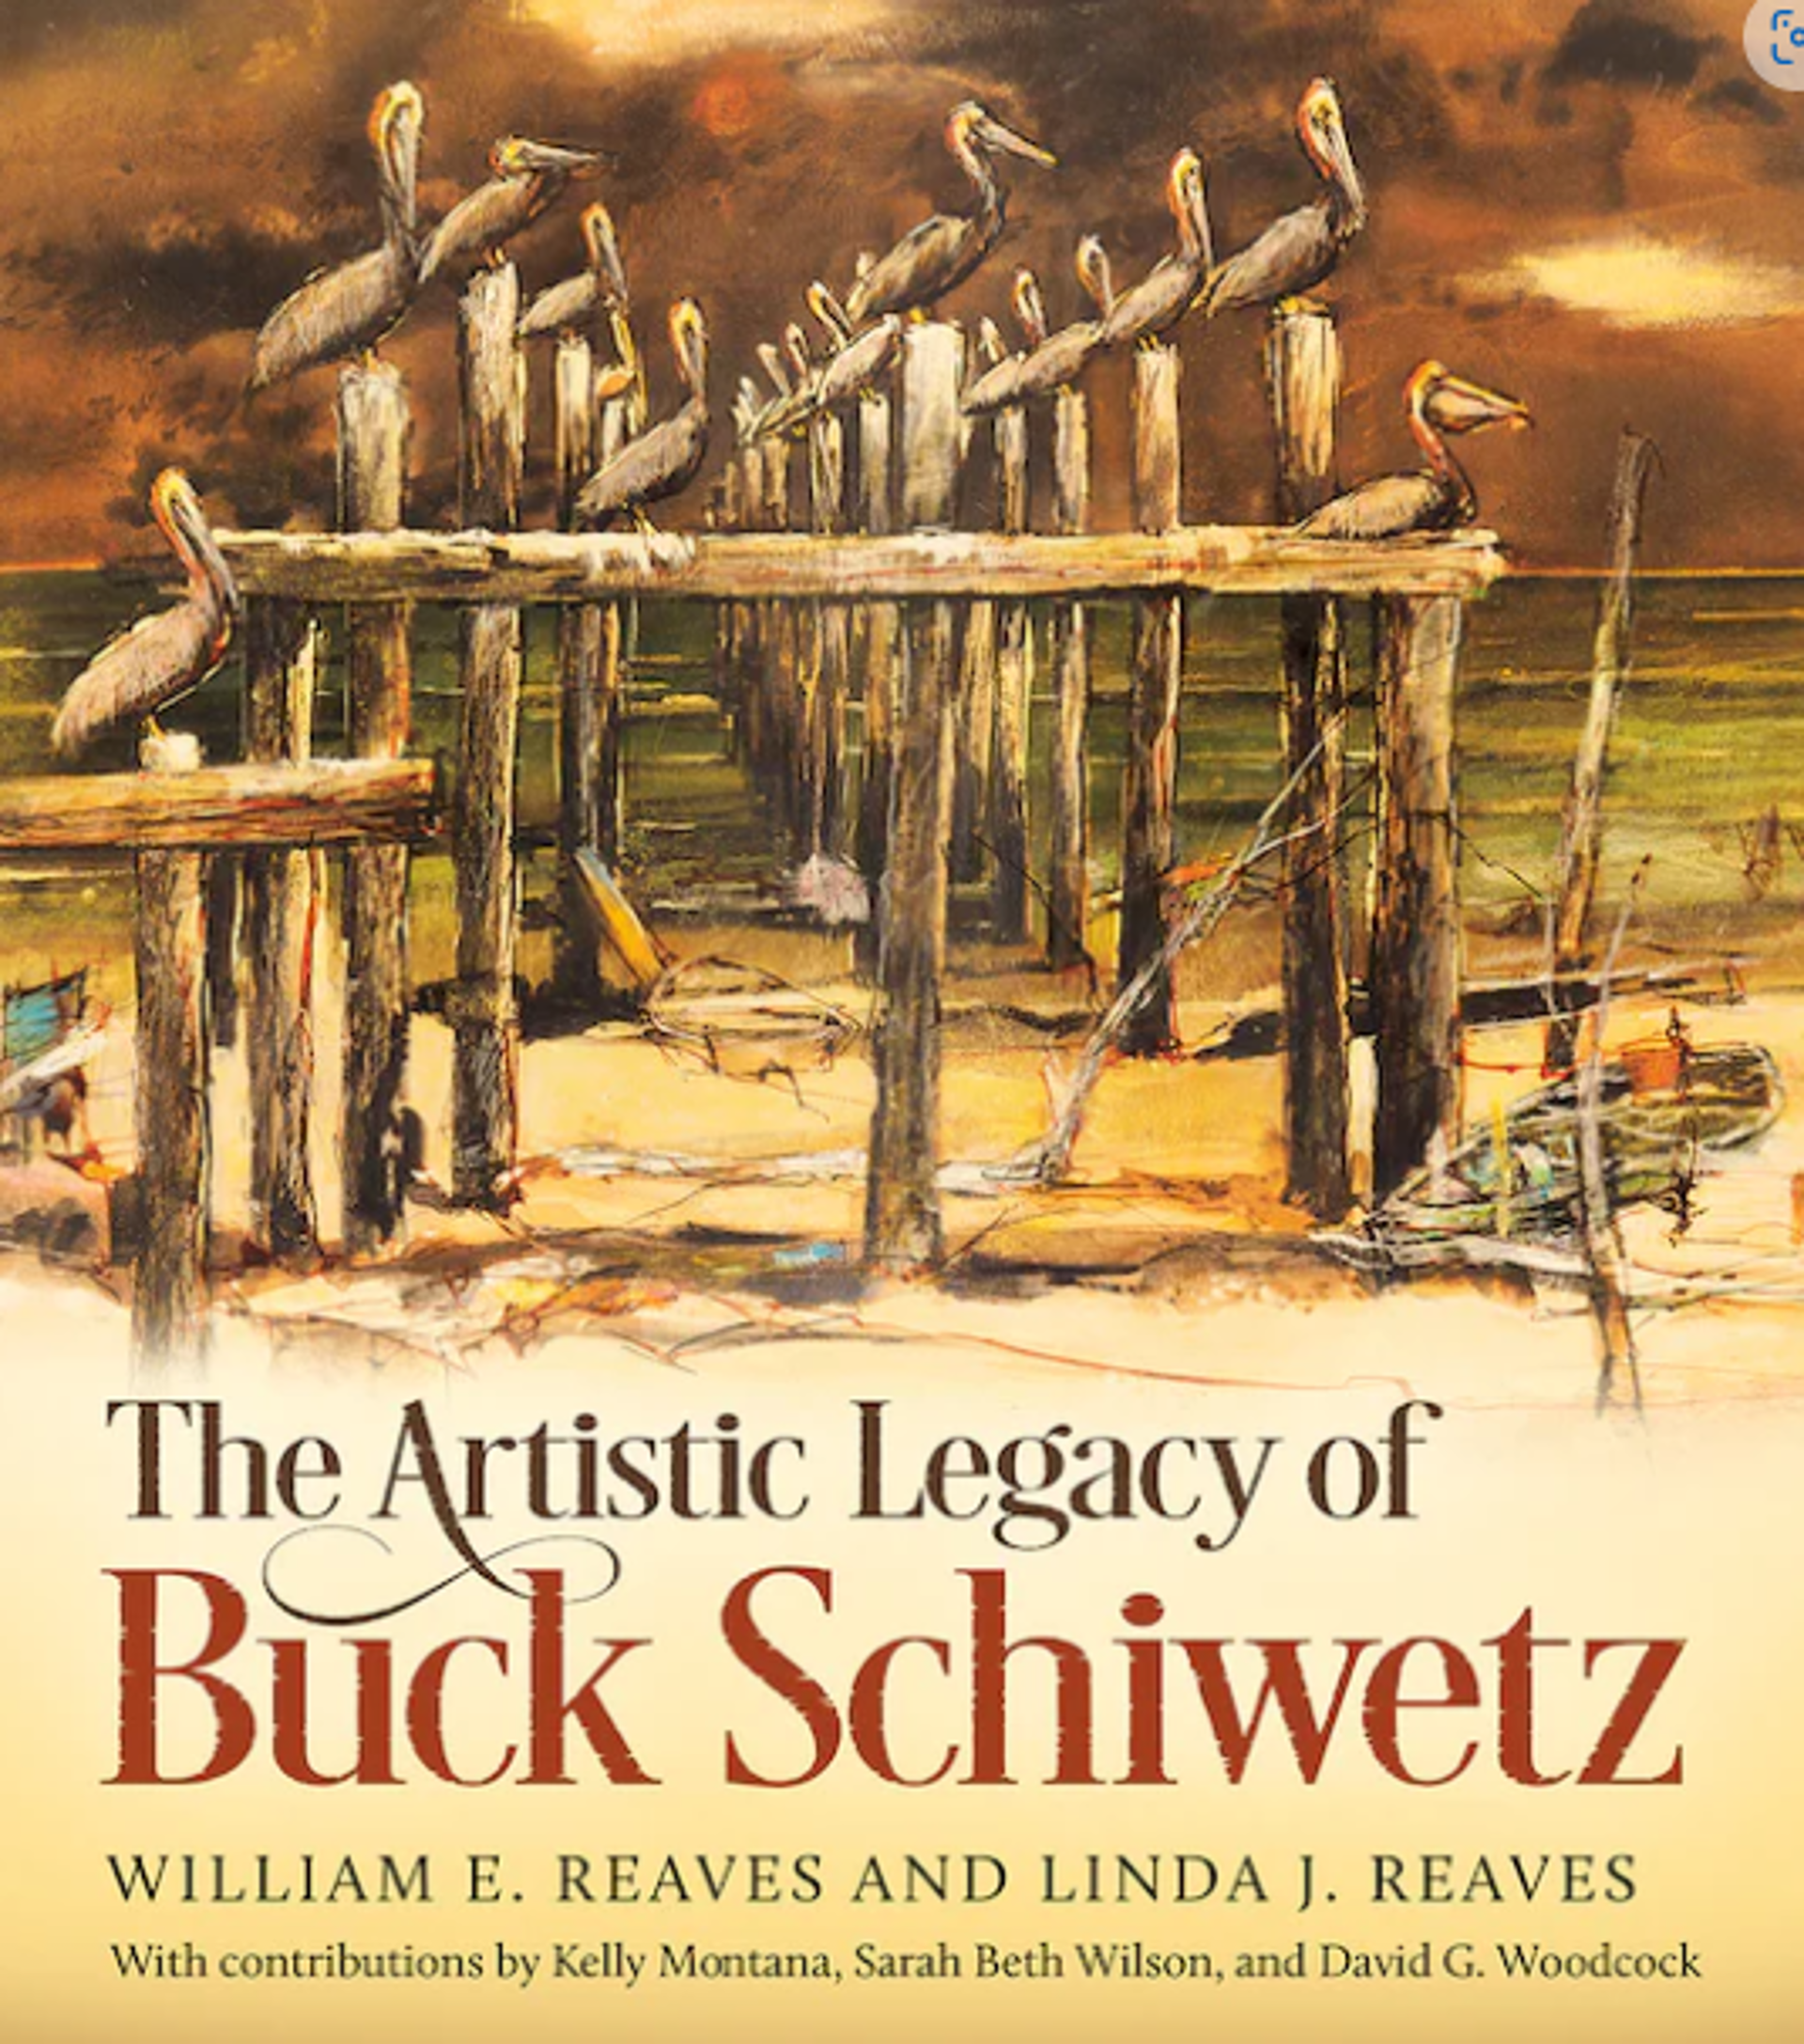 The Artistic Legacy of Buck Schiwetz  by William E. Reaves Jr. and Linda J. Reaves; Contriutions by Sarah Beth Wilson, David G. Woodcock and Kelly Montanab by Publications